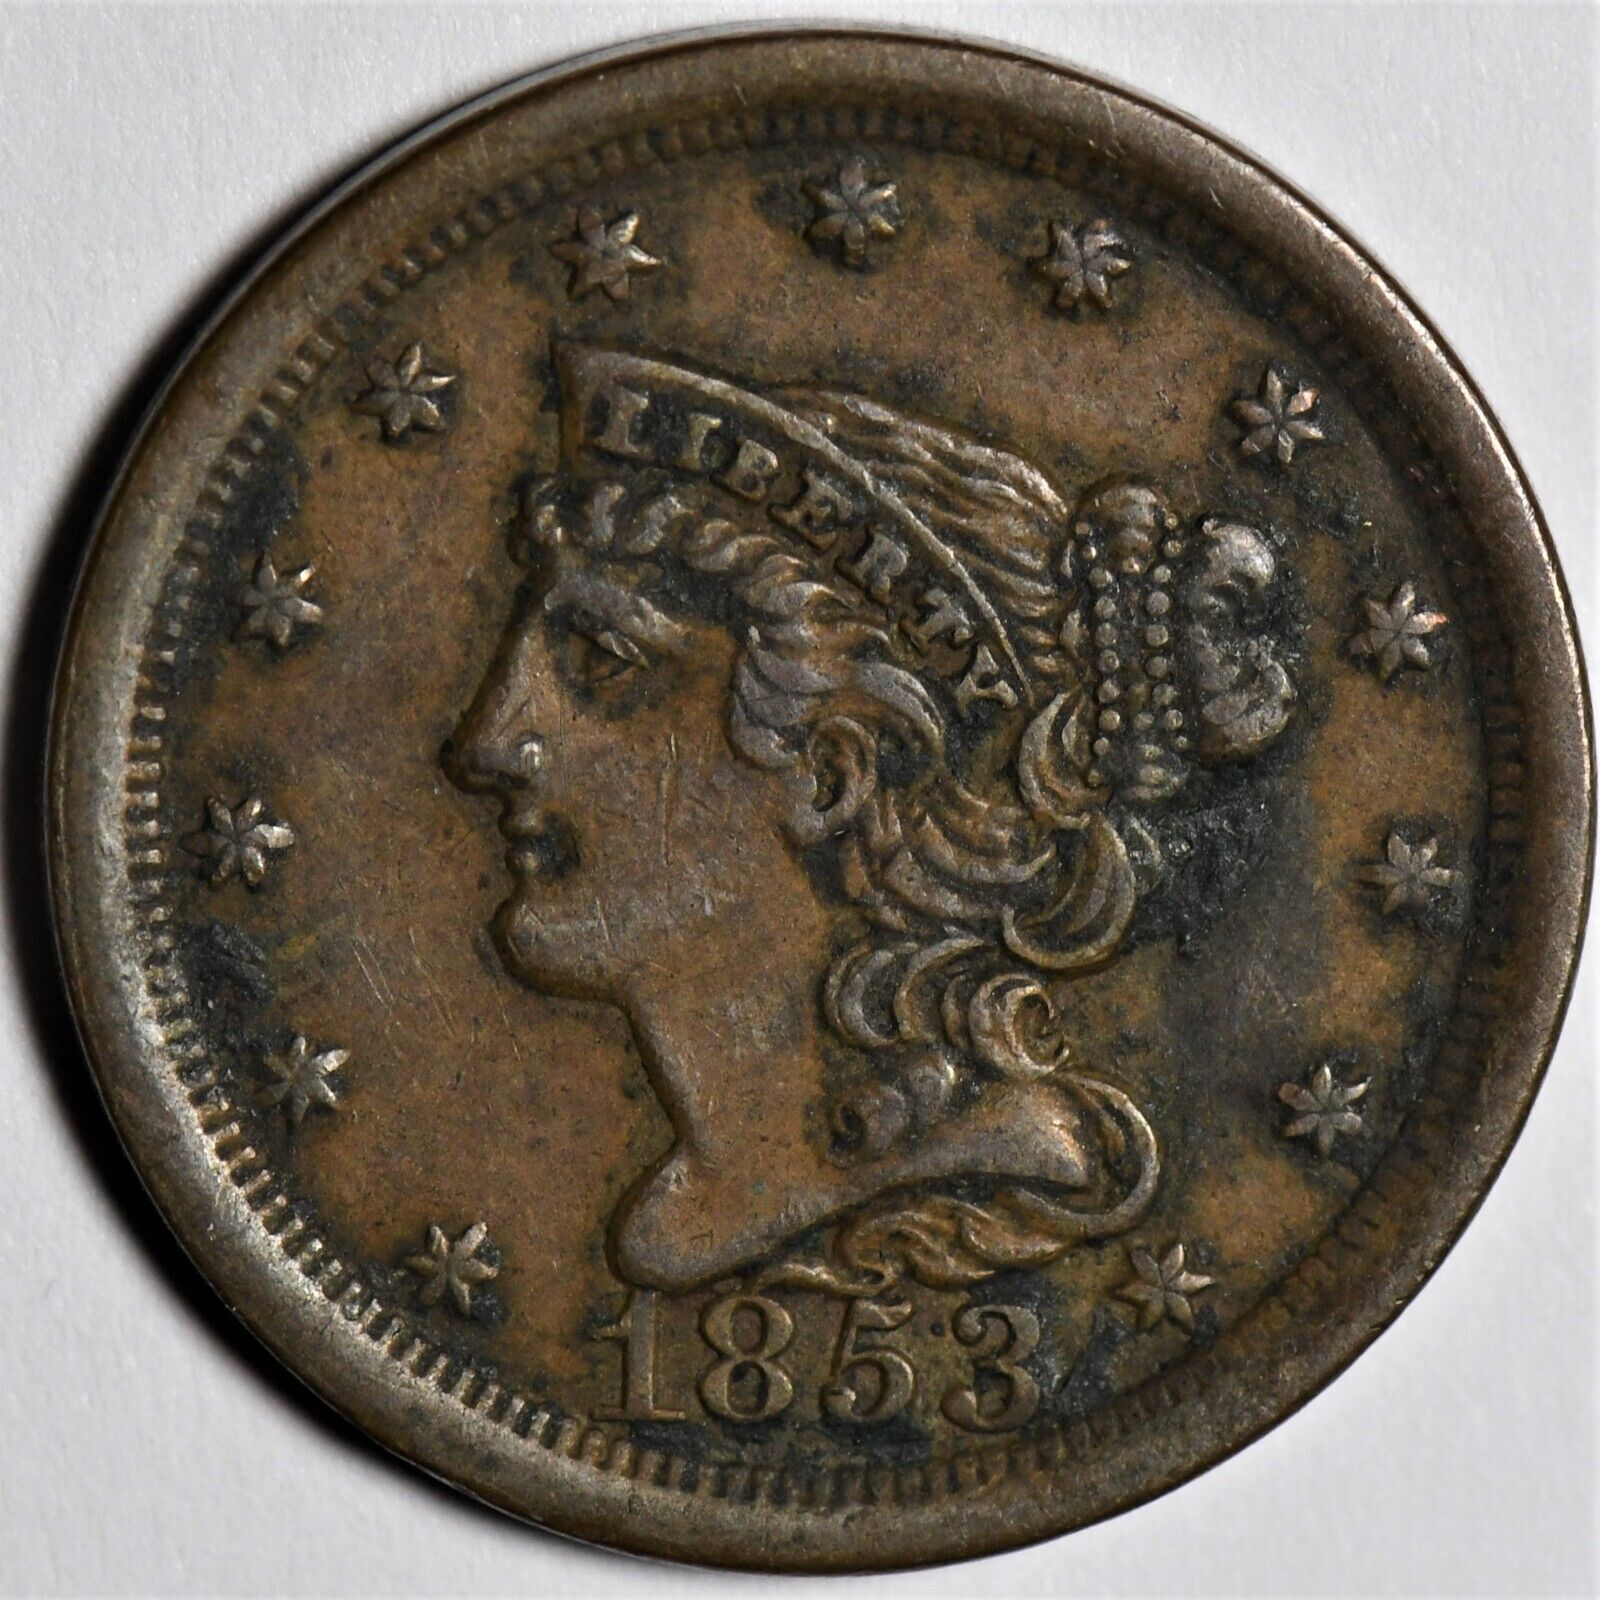 1853 Braided Hair Half Cent, Sharp Looking Higher Circulated Condition.